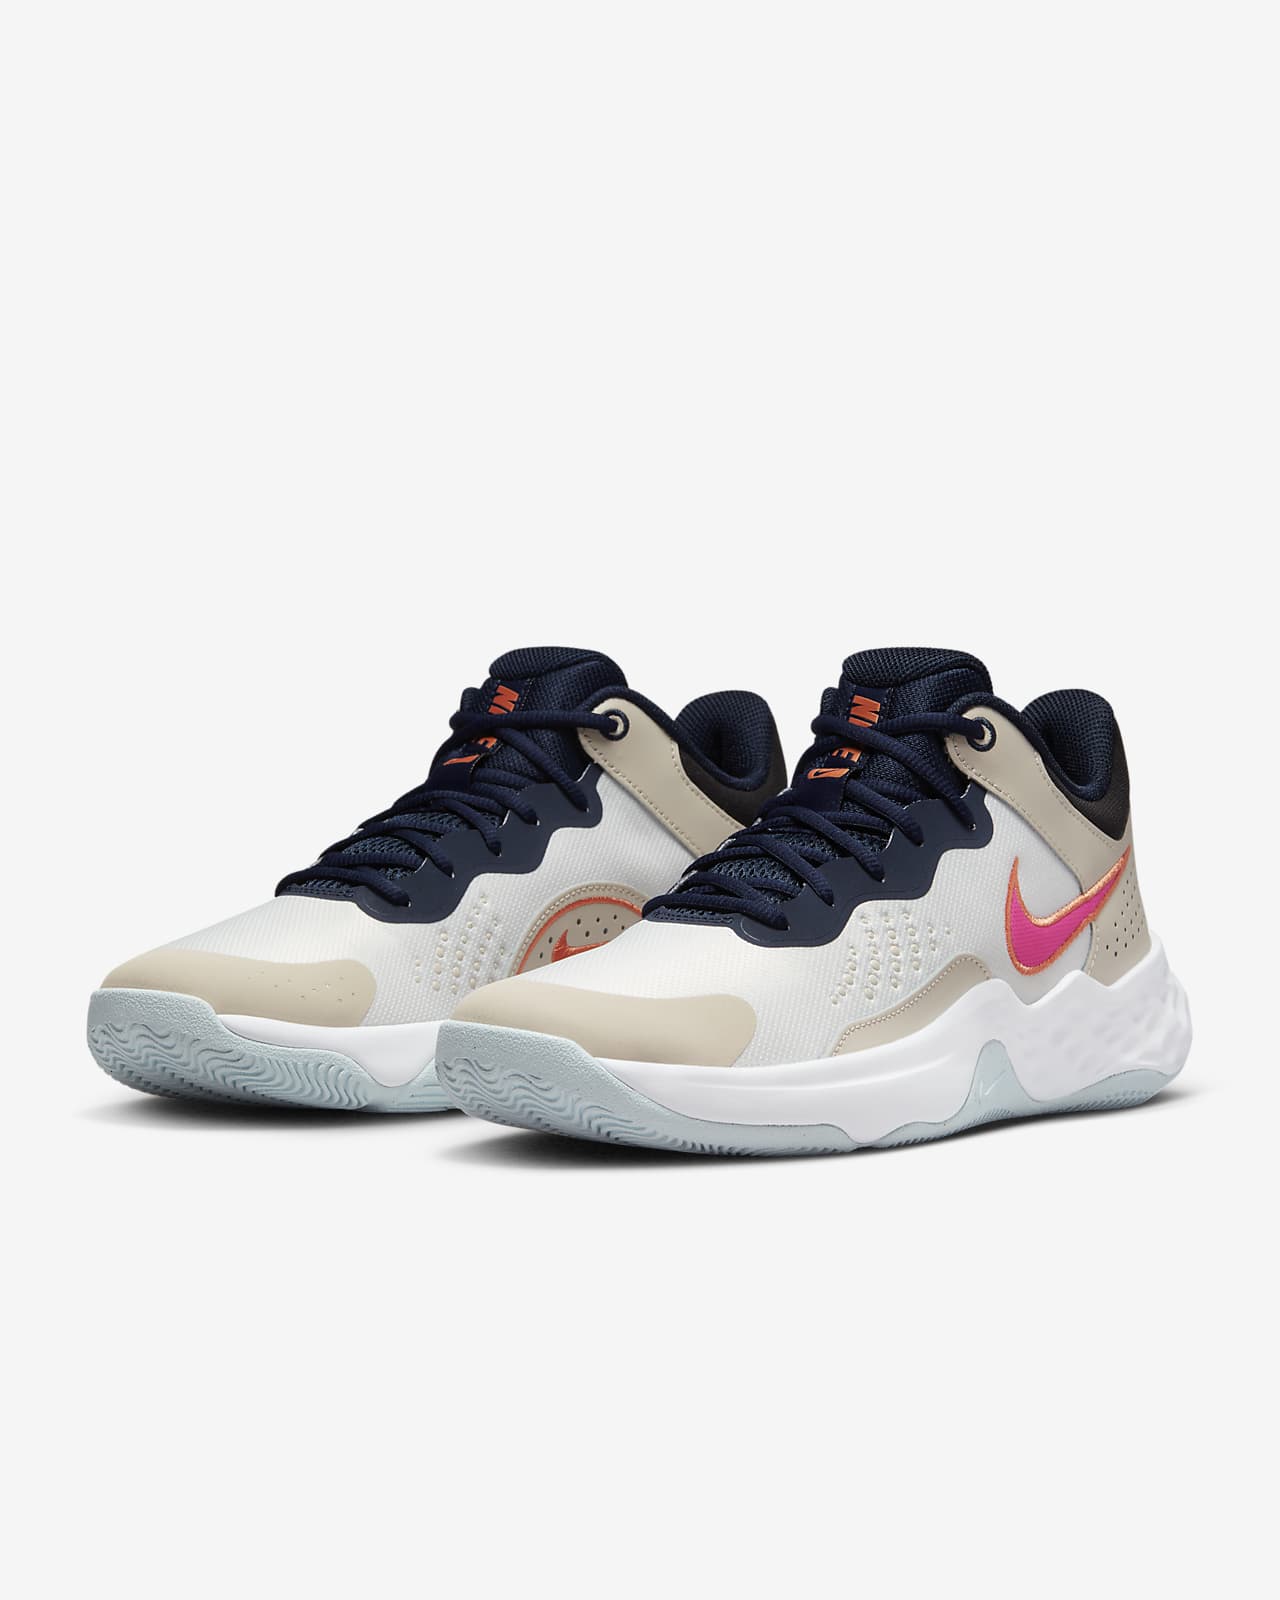 Nike Flyby Mid 3 Basketball Shoes Nike In